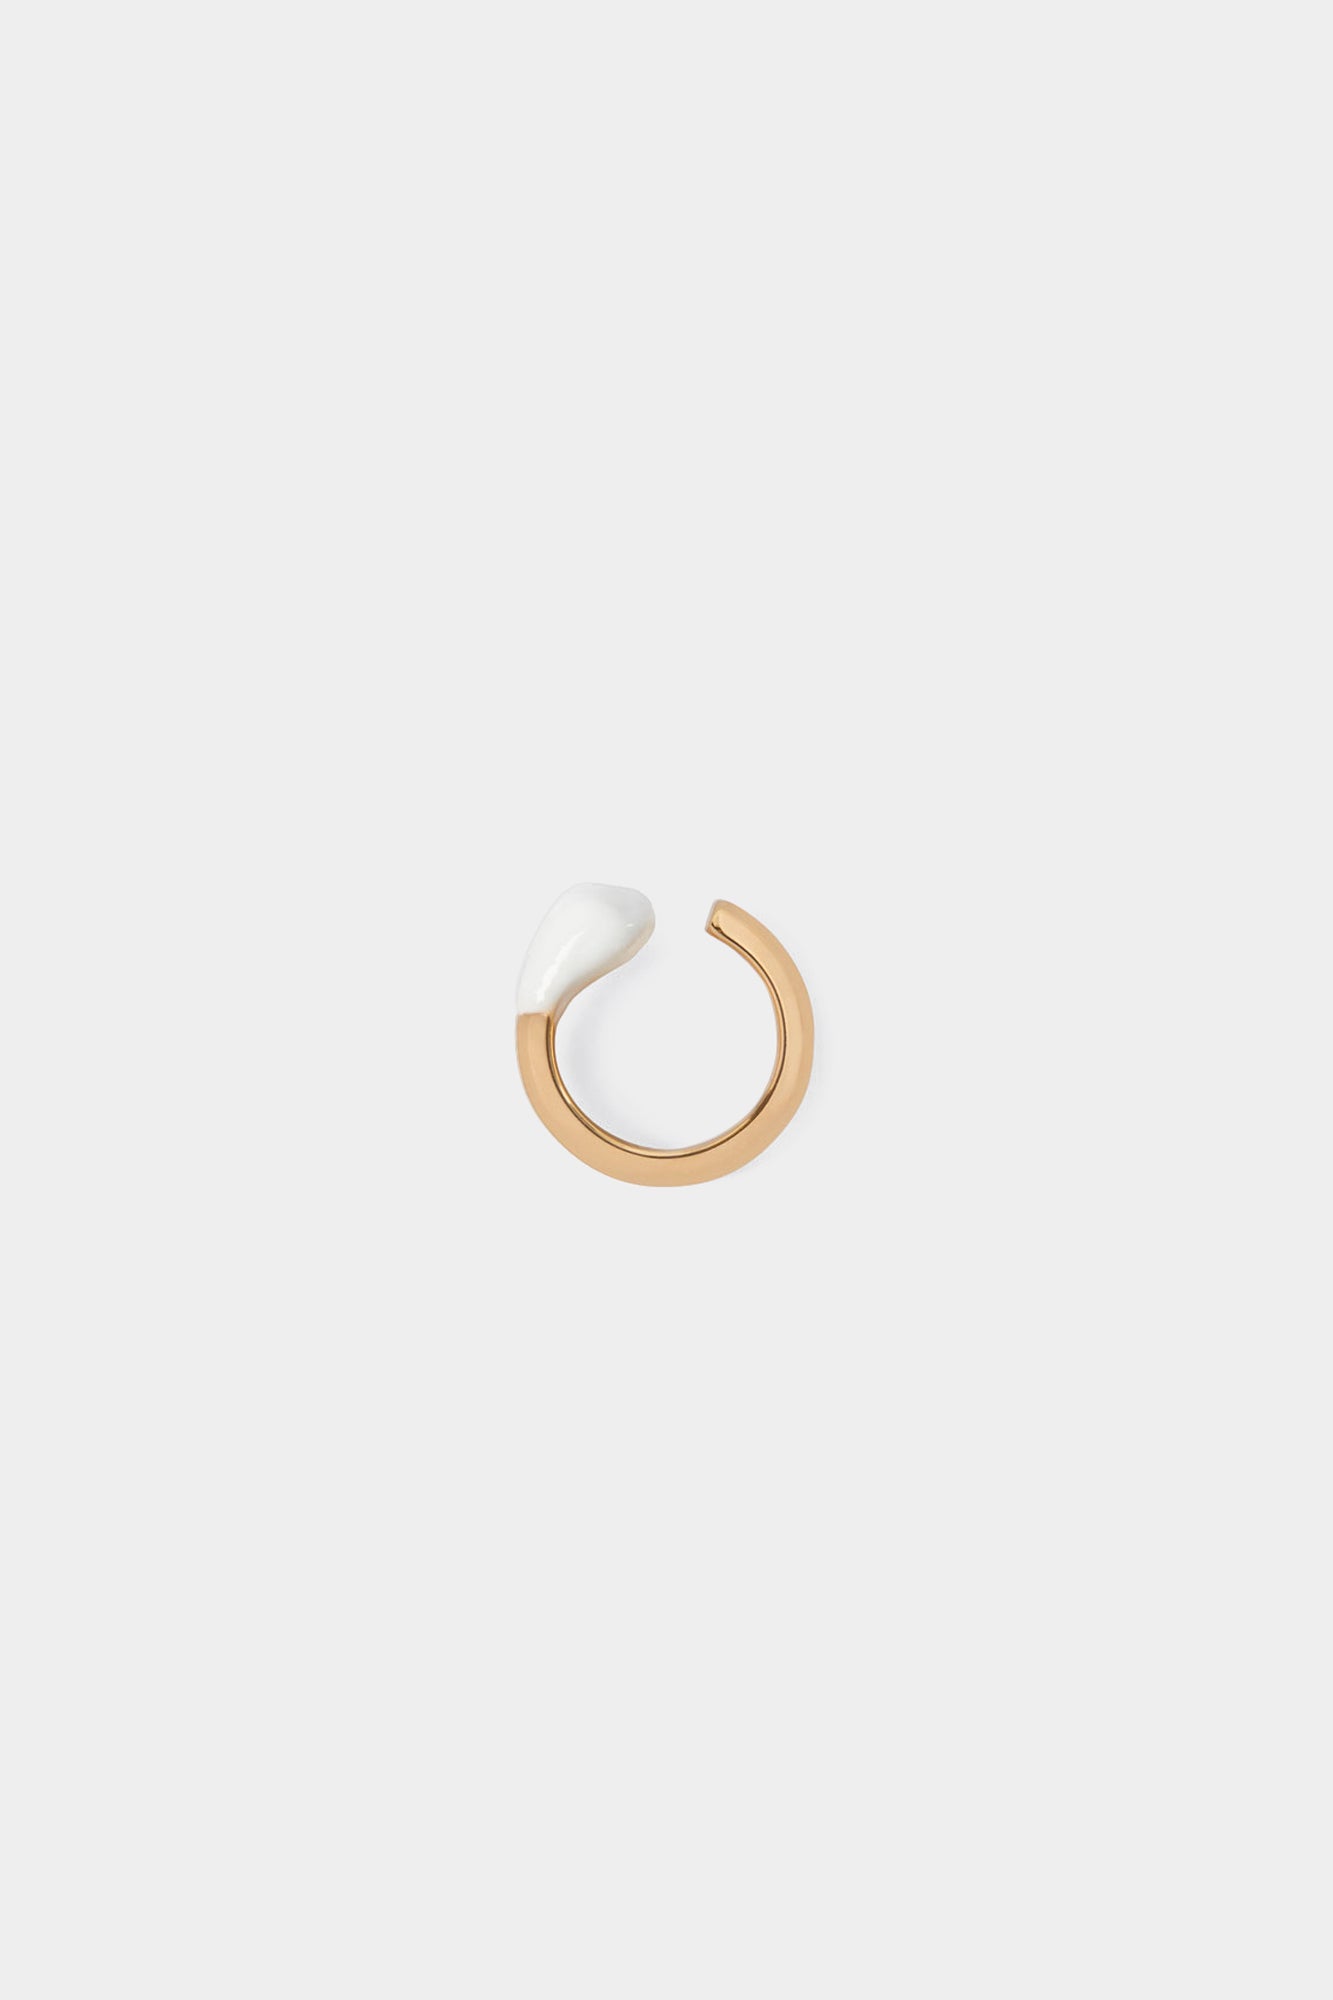 RUBBERIZED RING GOLD / white